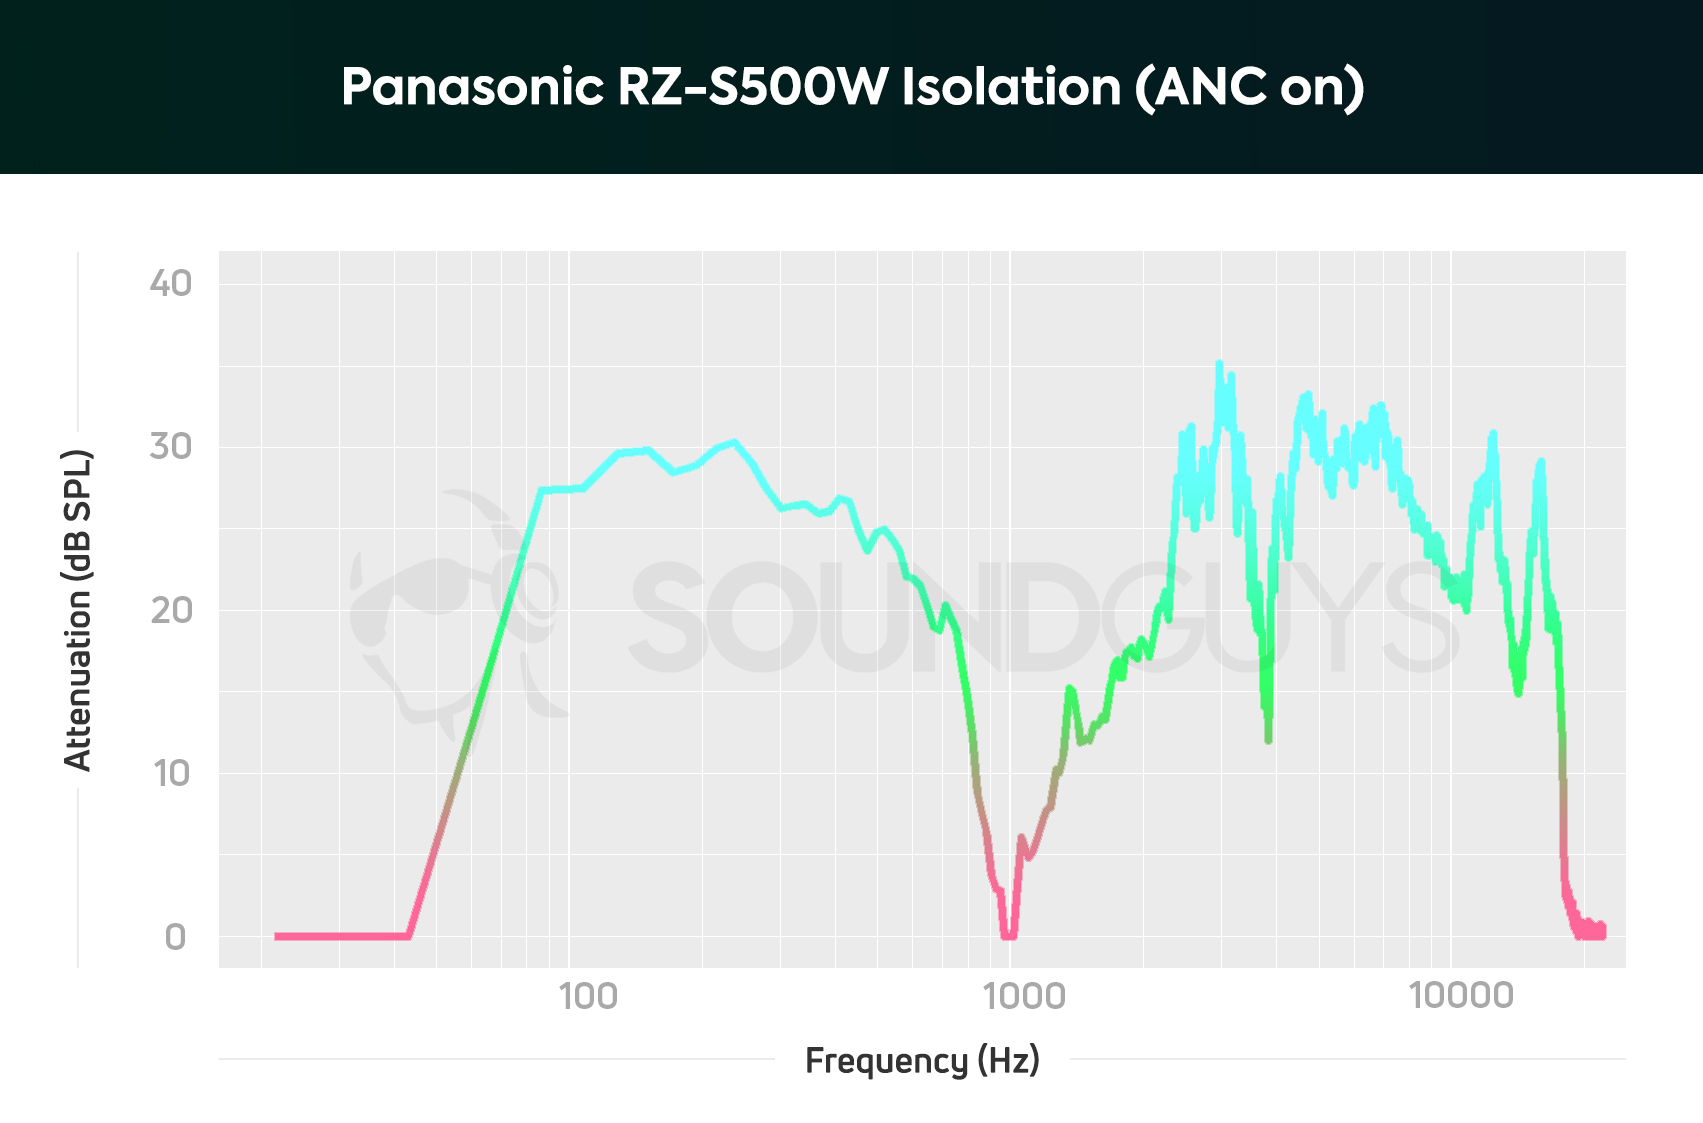 An isolation chart of the Panasonic RZ-S500W noise canceling earbuds with ANC on; bass and low-midrange sounds are heavily attenuated.